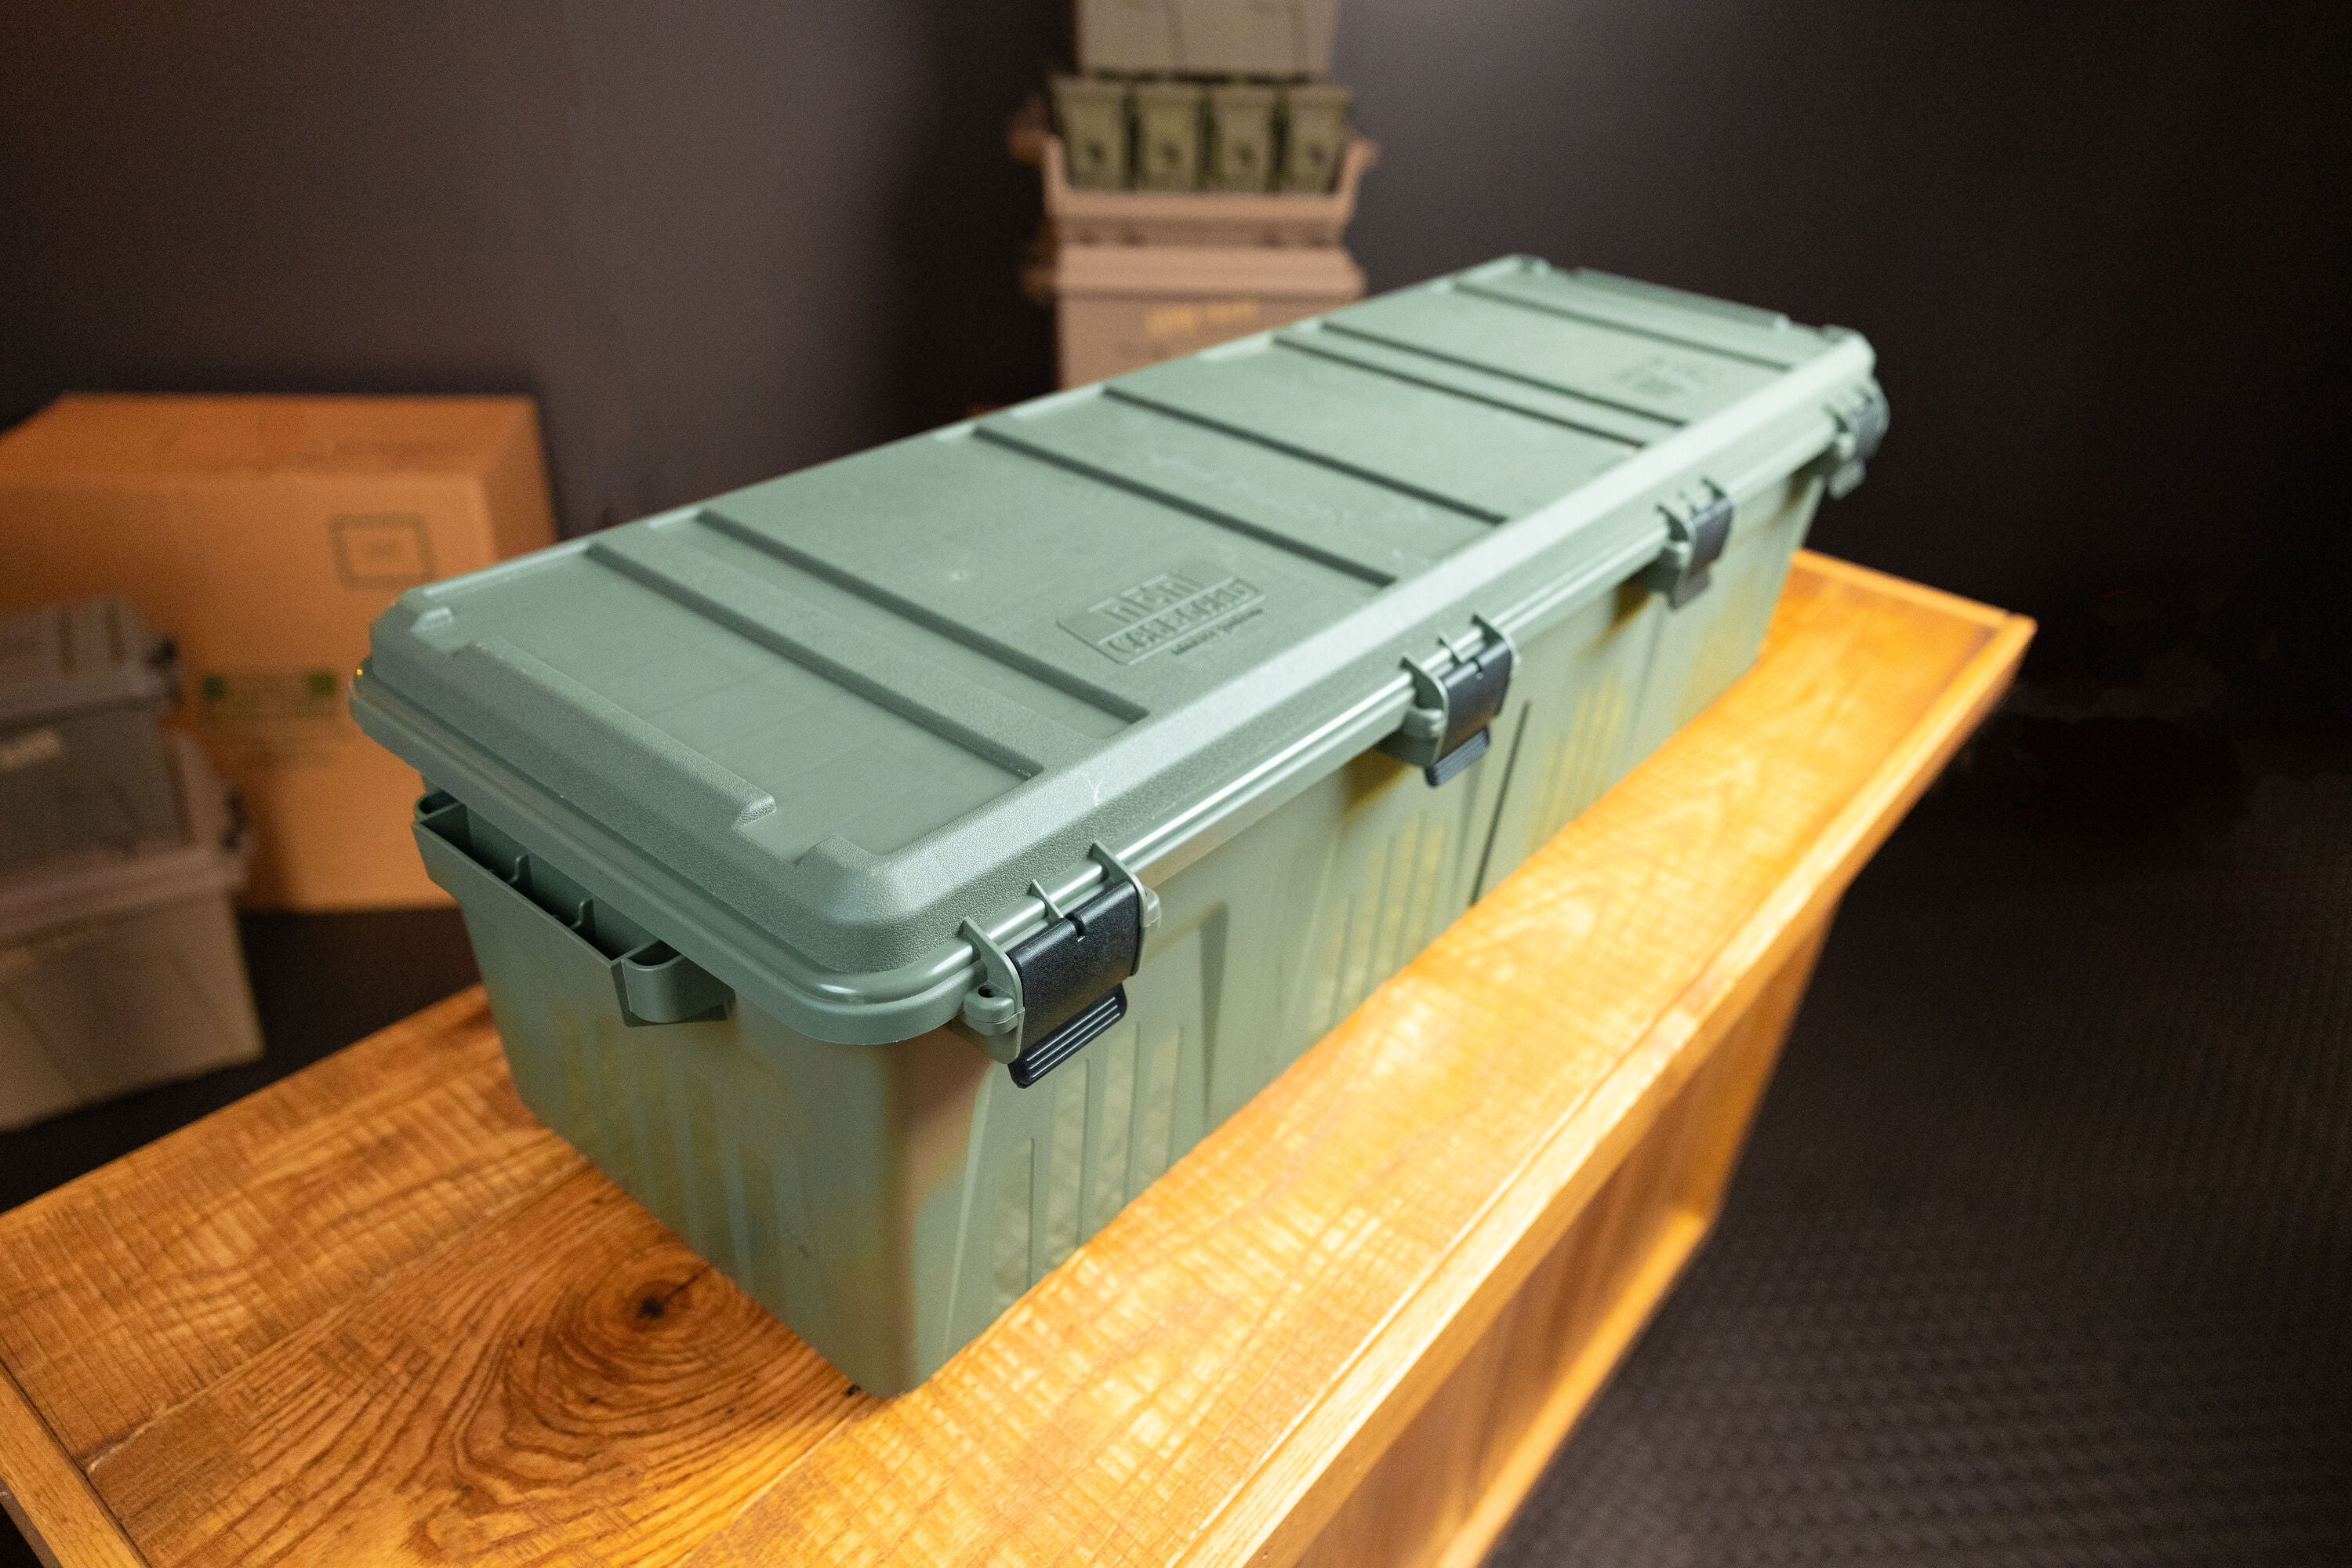 Advantages of an Ammo Box, Instead of the packaging